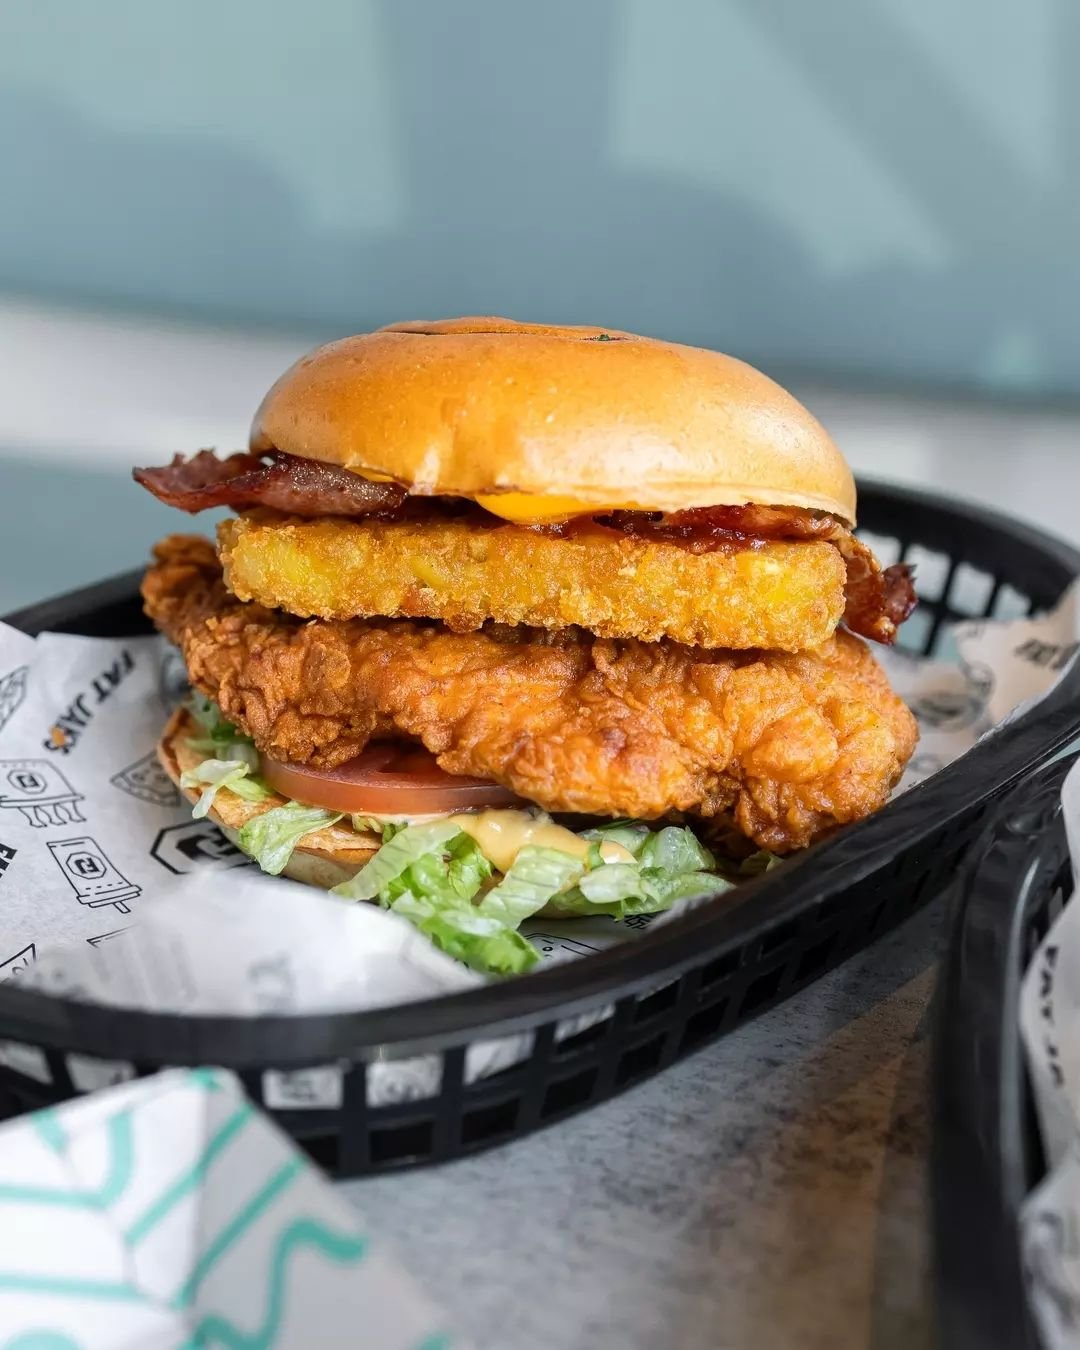 Buttermilk fried chicken AND a cheeky hashbrown 😱 We're obsessed with the Los Pollos Hermanos Burger!